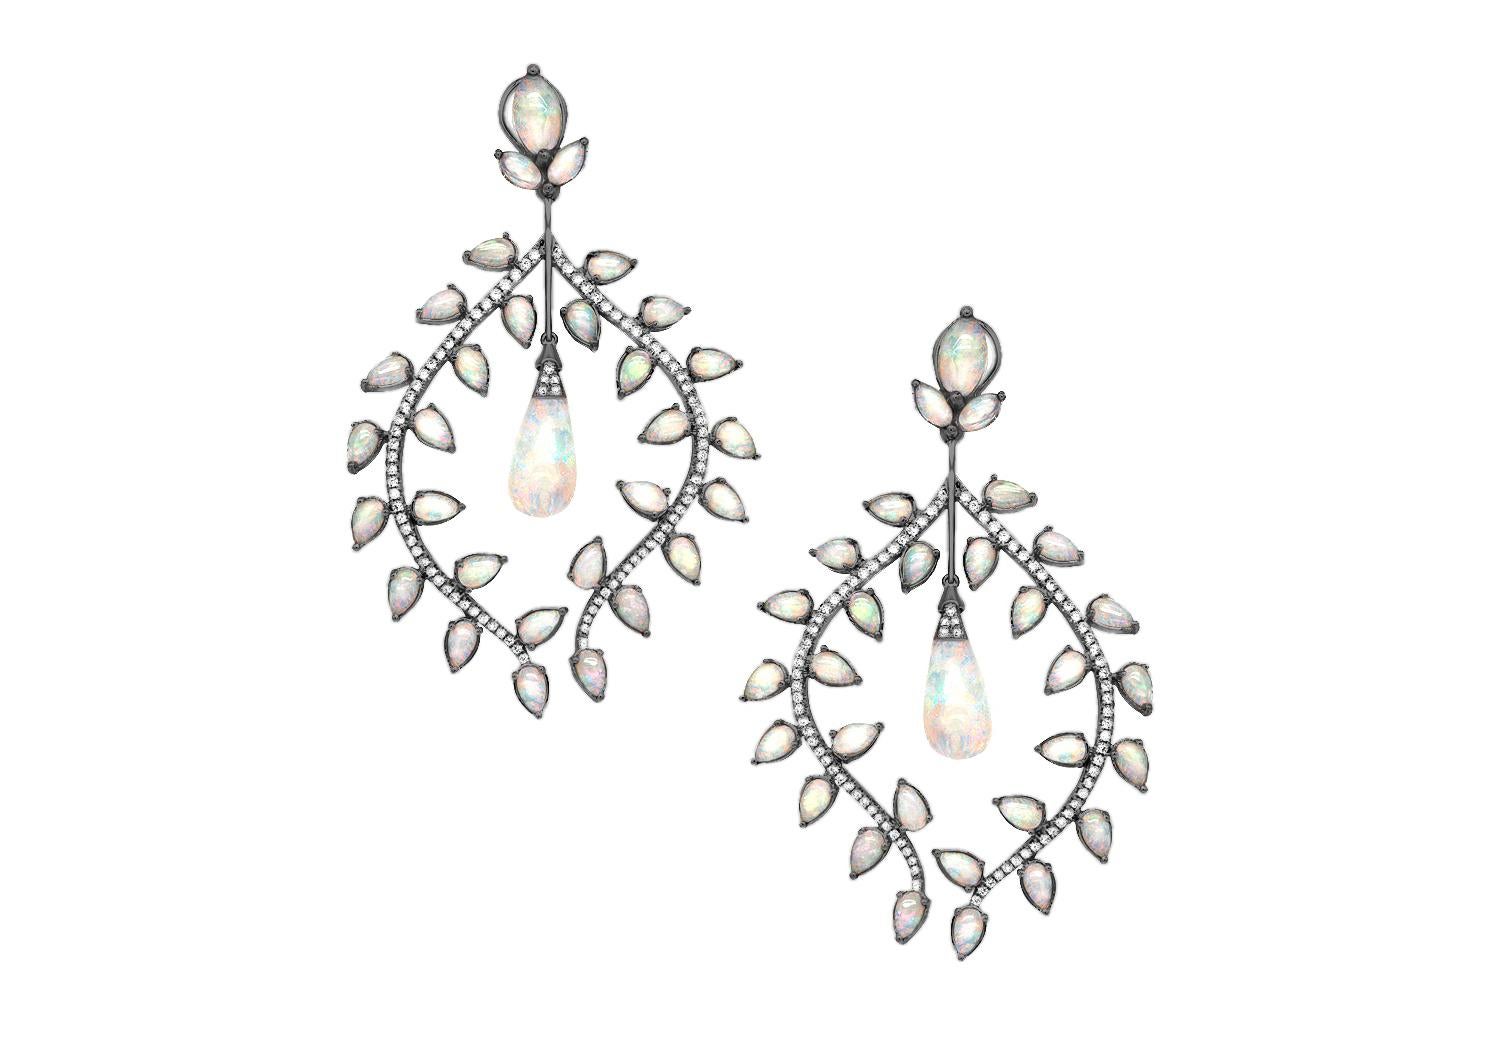 Vintage Leaf Opal Pear Shape Earring with Diamonds in 18k White Gold With Black Rhodium, from 'G-One' Collection

Gemstone Weight: Opal- 17.84 Carats

Diamond: G-H / VS, Approx Wt: 1.24 Carats